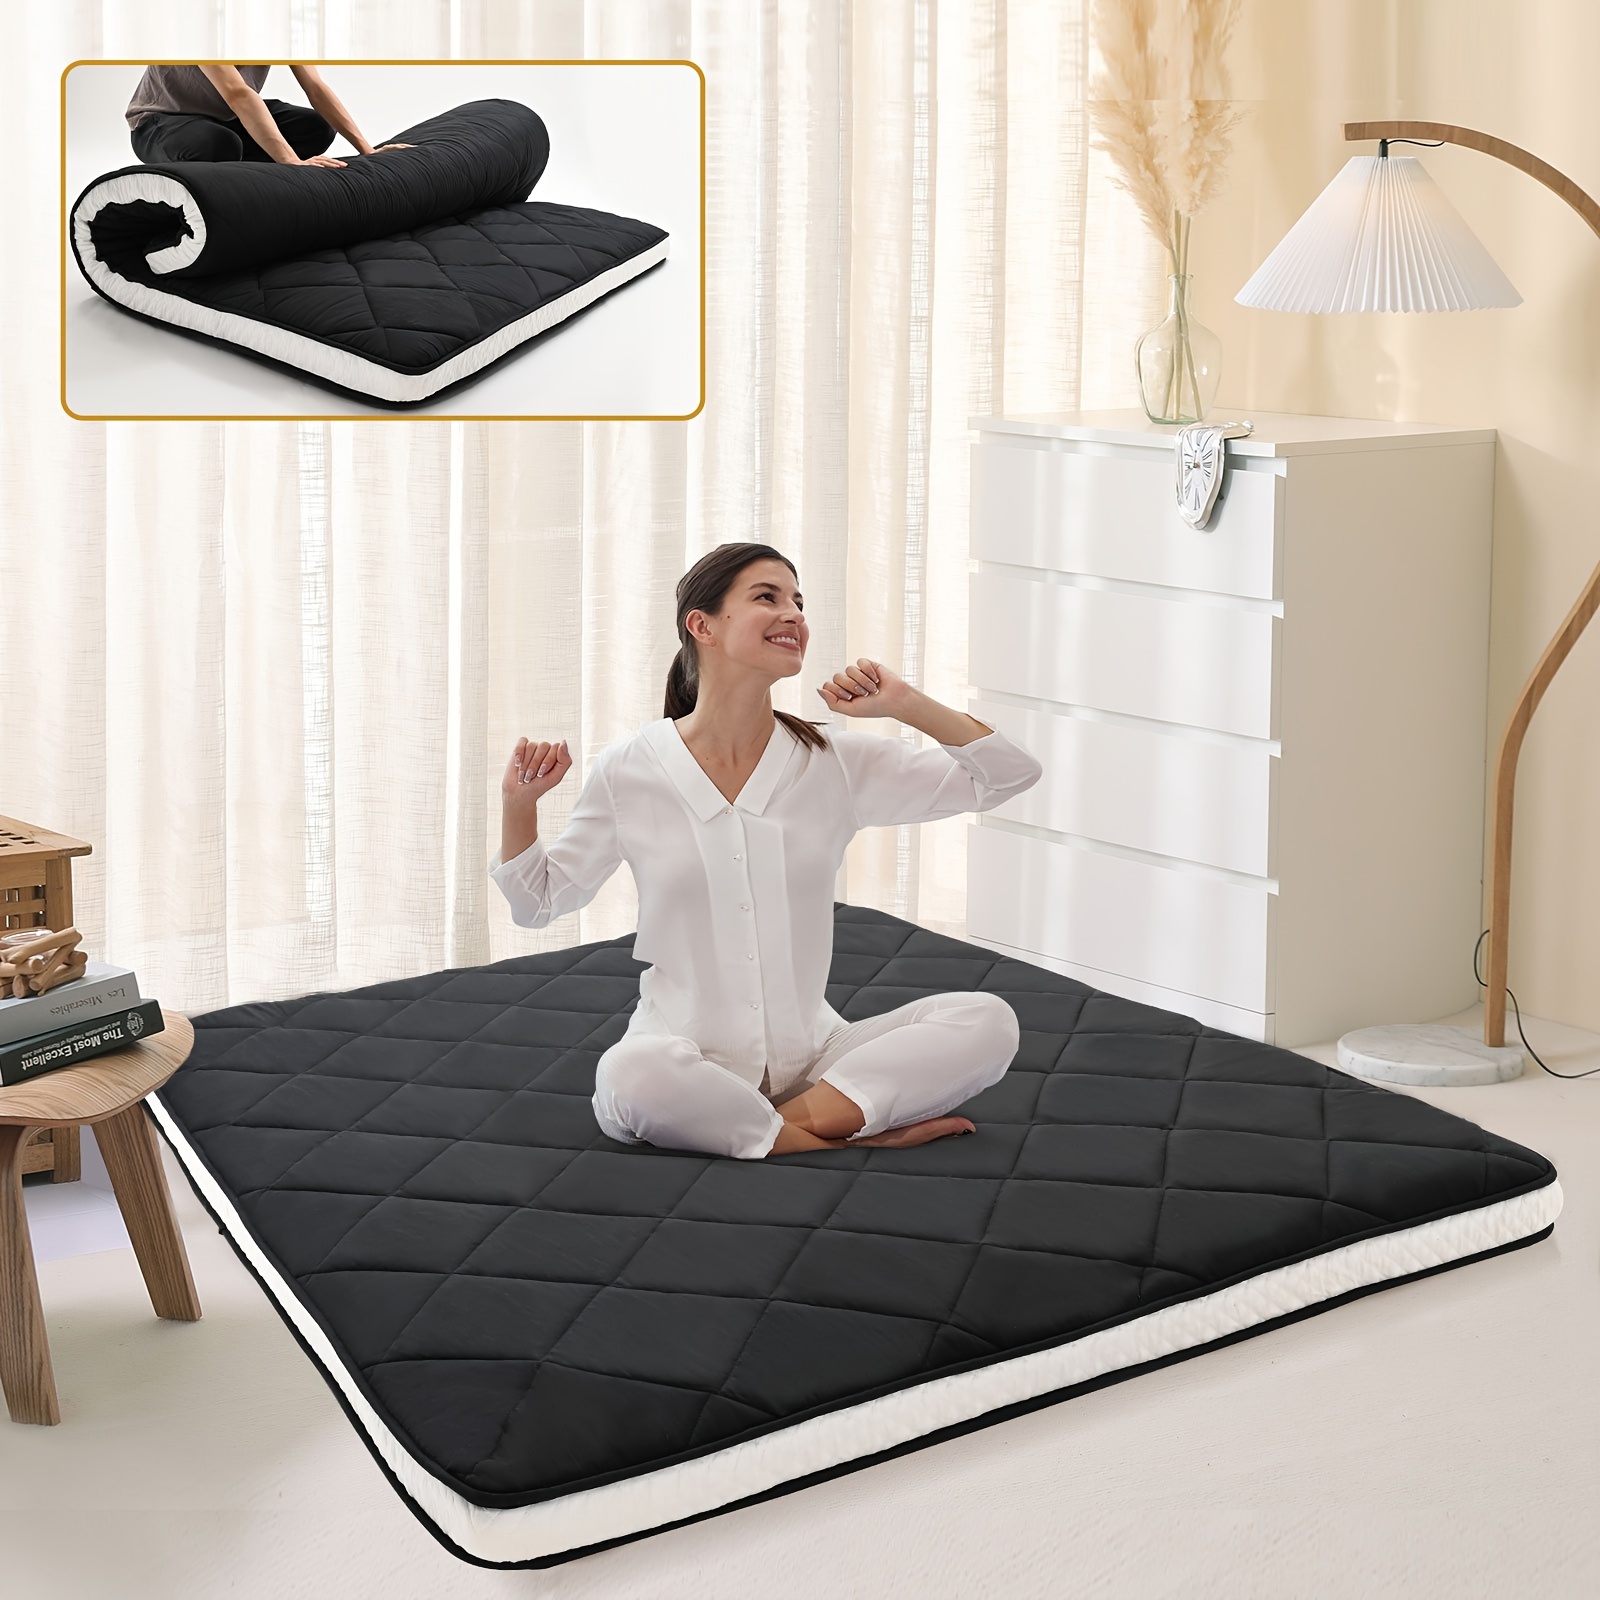 

Lilypelle 80" L×54" W Japanese Floor Futon Mattress, 4" Extra Thick Foldable Roll Up Sleeping Pad With Bandage And Storage Bag, Full Size, Black